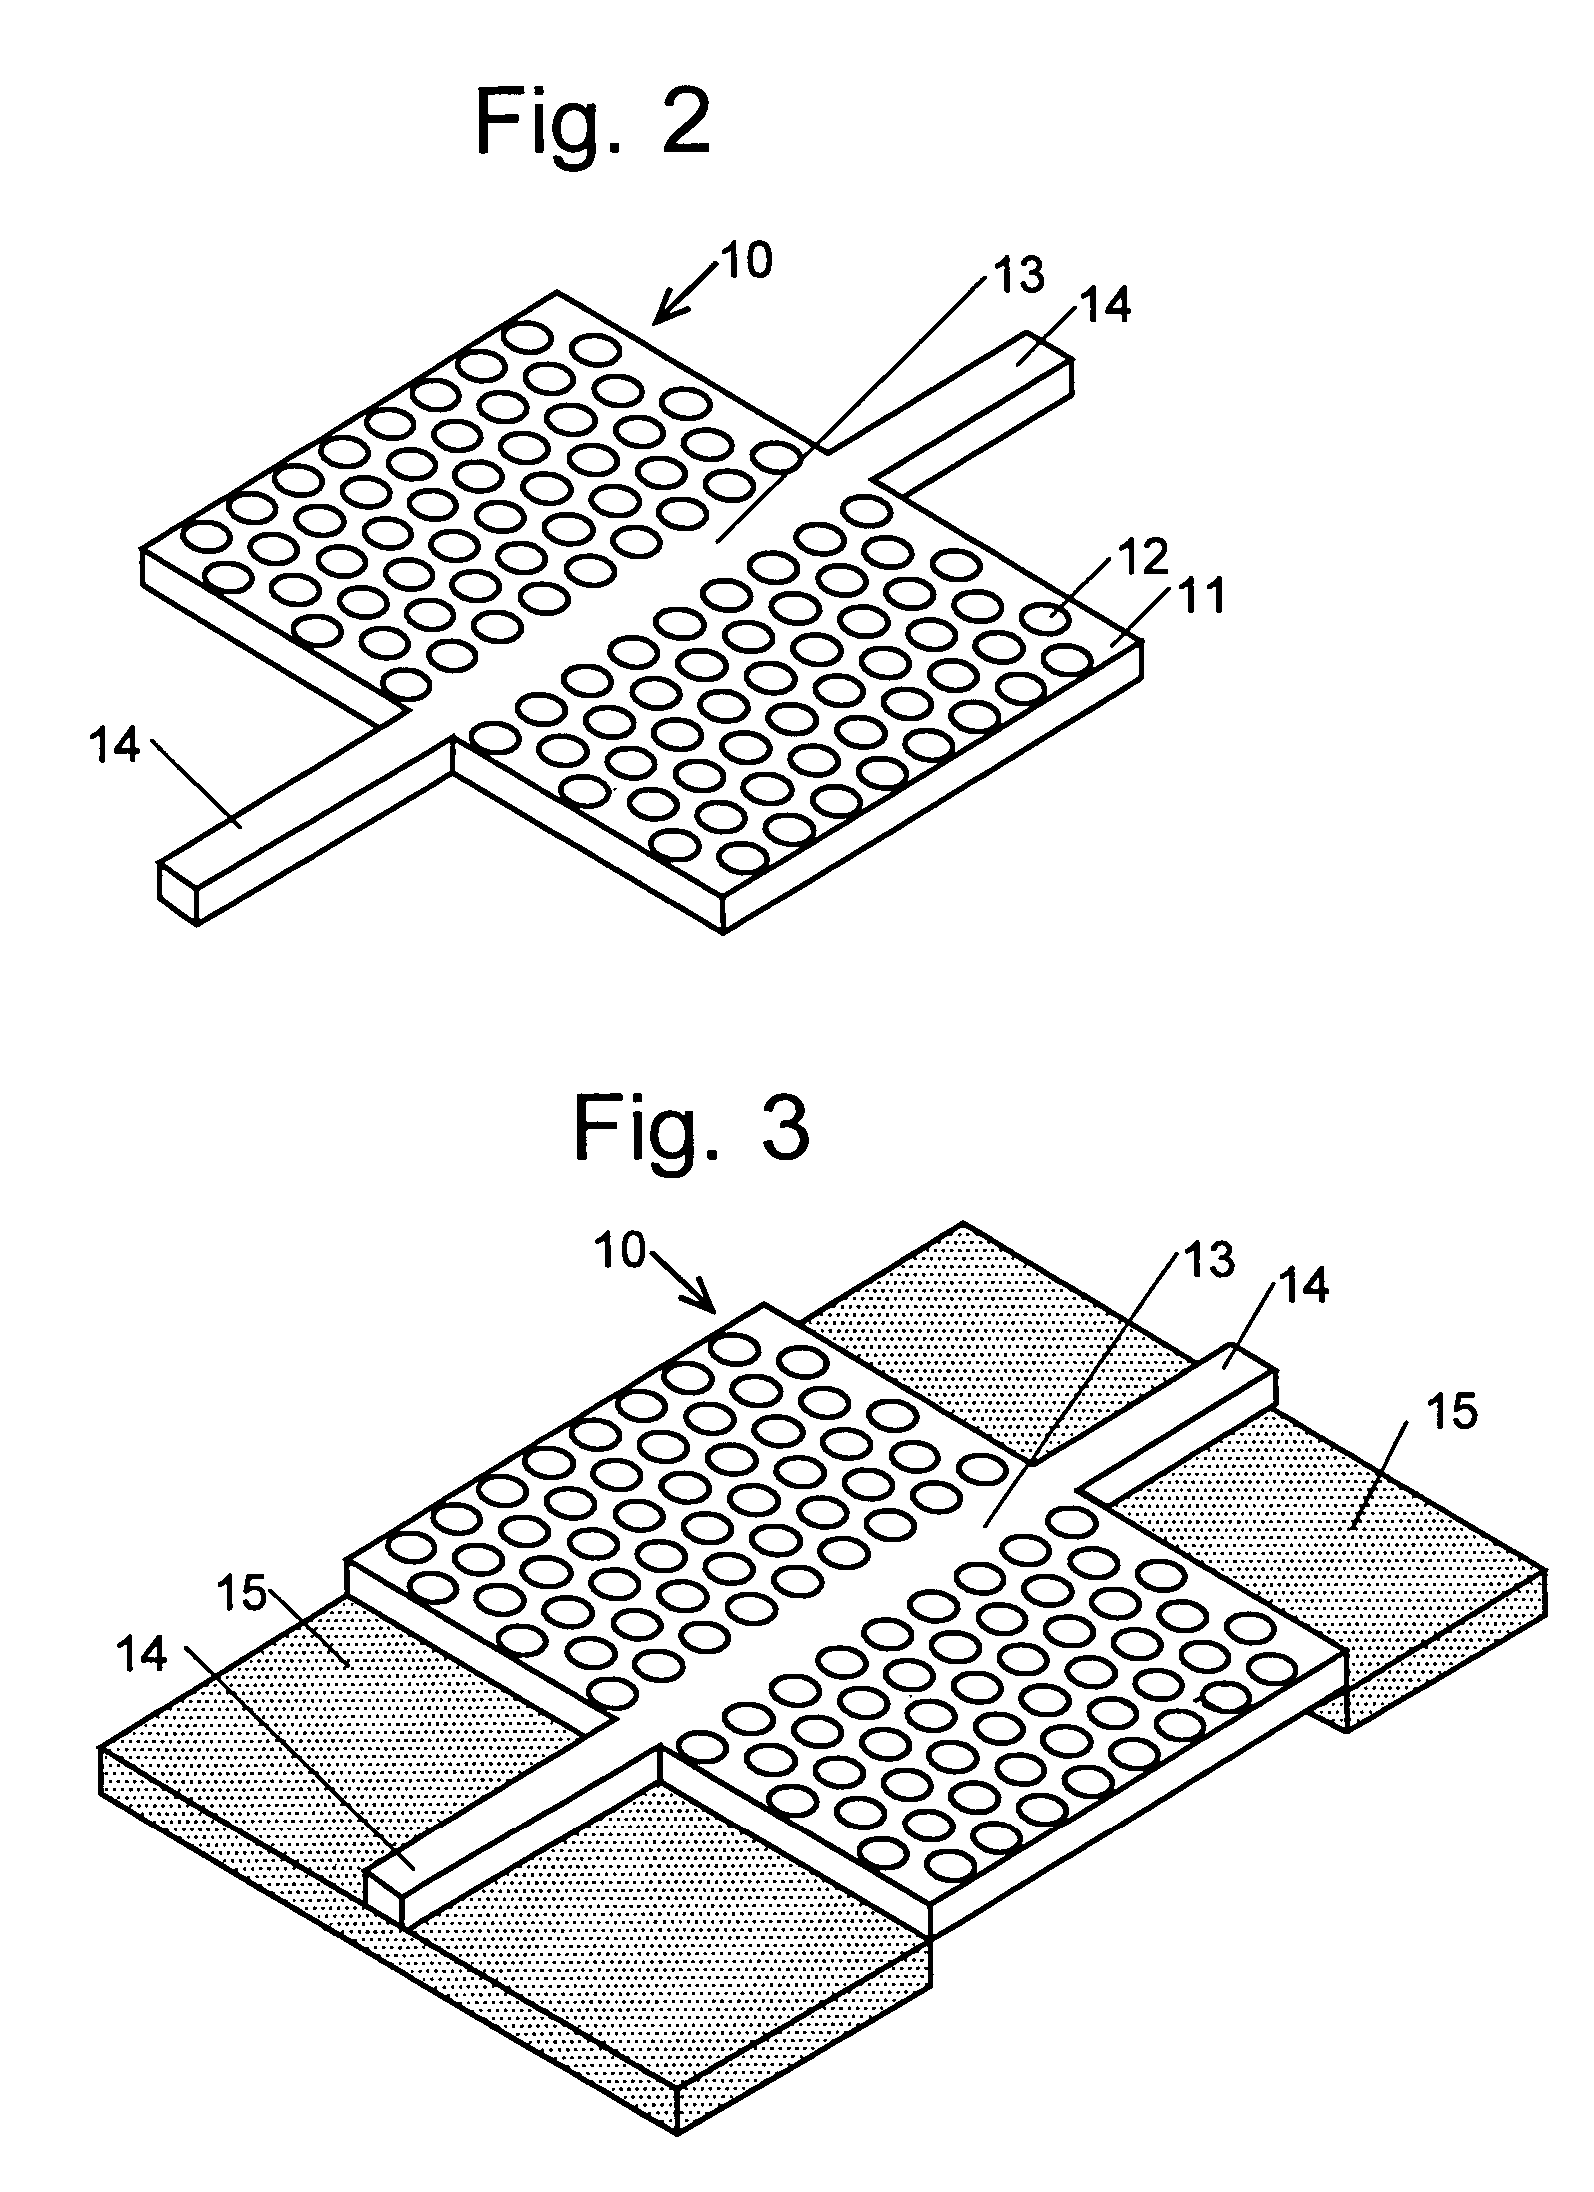 Two-dimensional photonic crystal having air-bridge structure and method for manufacturing such a crystal